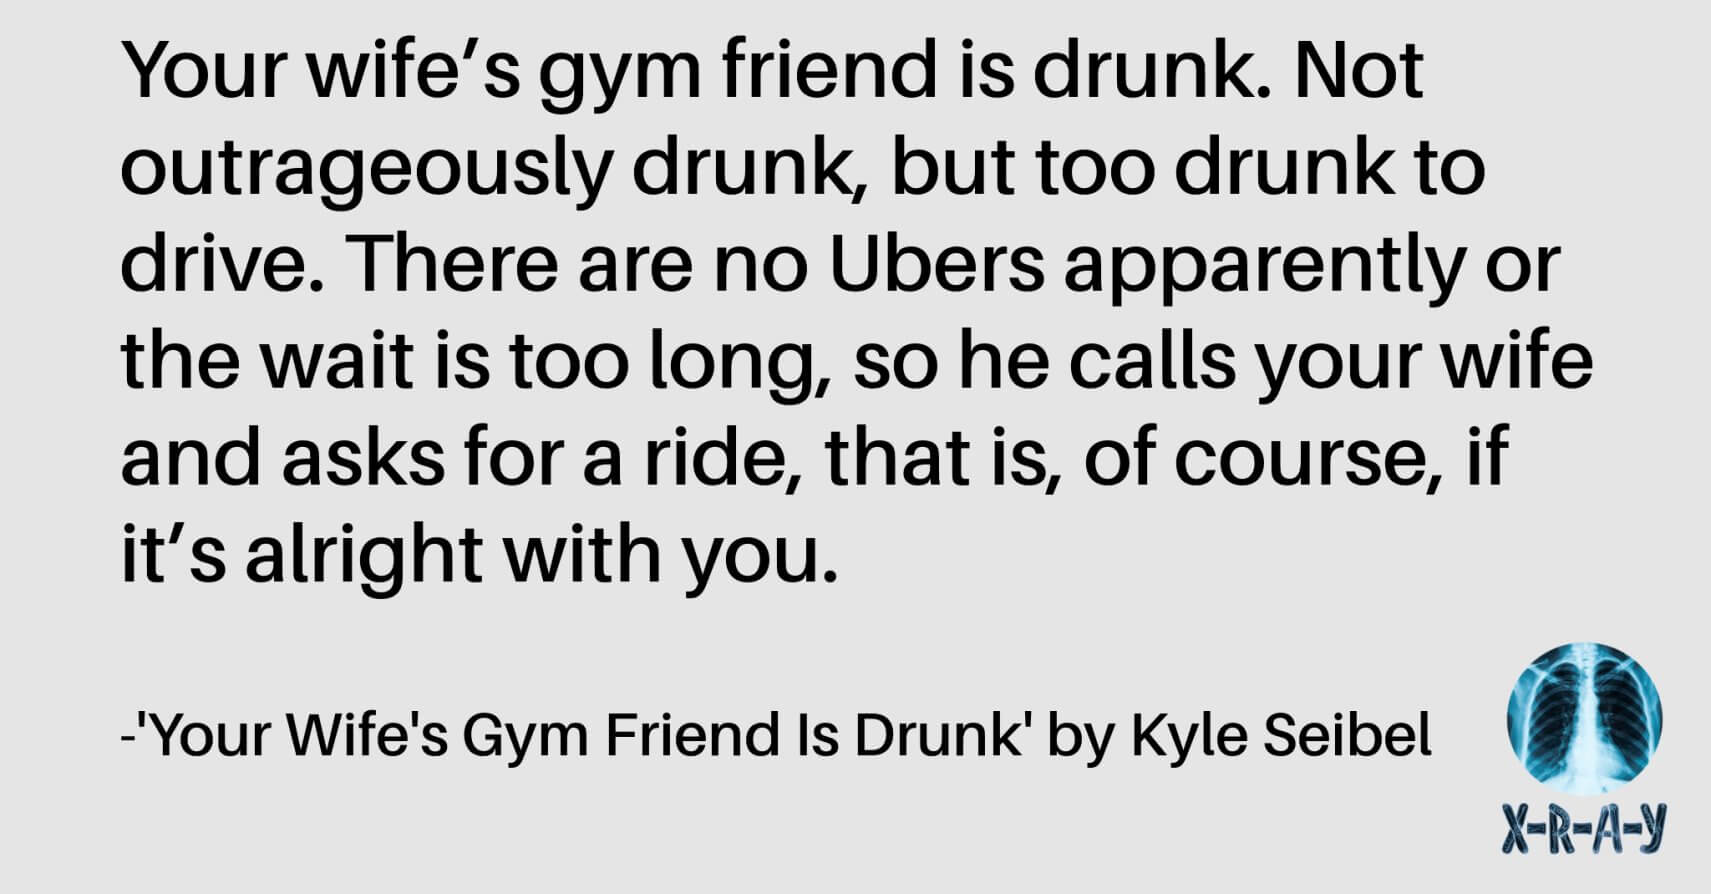 YOUR WIFE’S GYM FRIEND IS DRUNK by Kyle Seibel